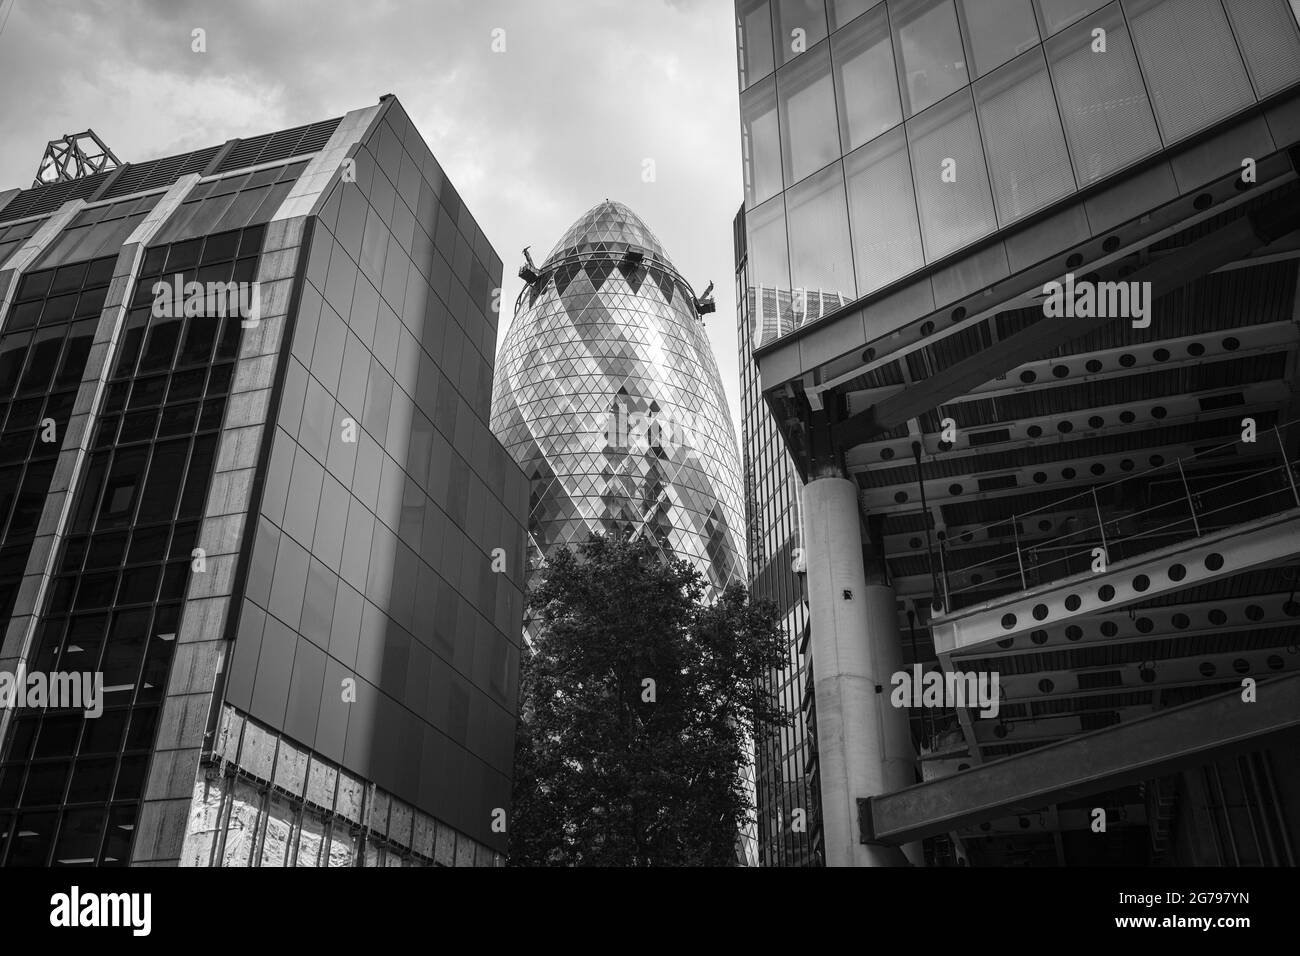 City of London, Financial District, pictures of architecture, bank buildings, connection of old and modern, view of the Financial District over the Thames, mirroring glass, window fronts, office buildings Stock Photo